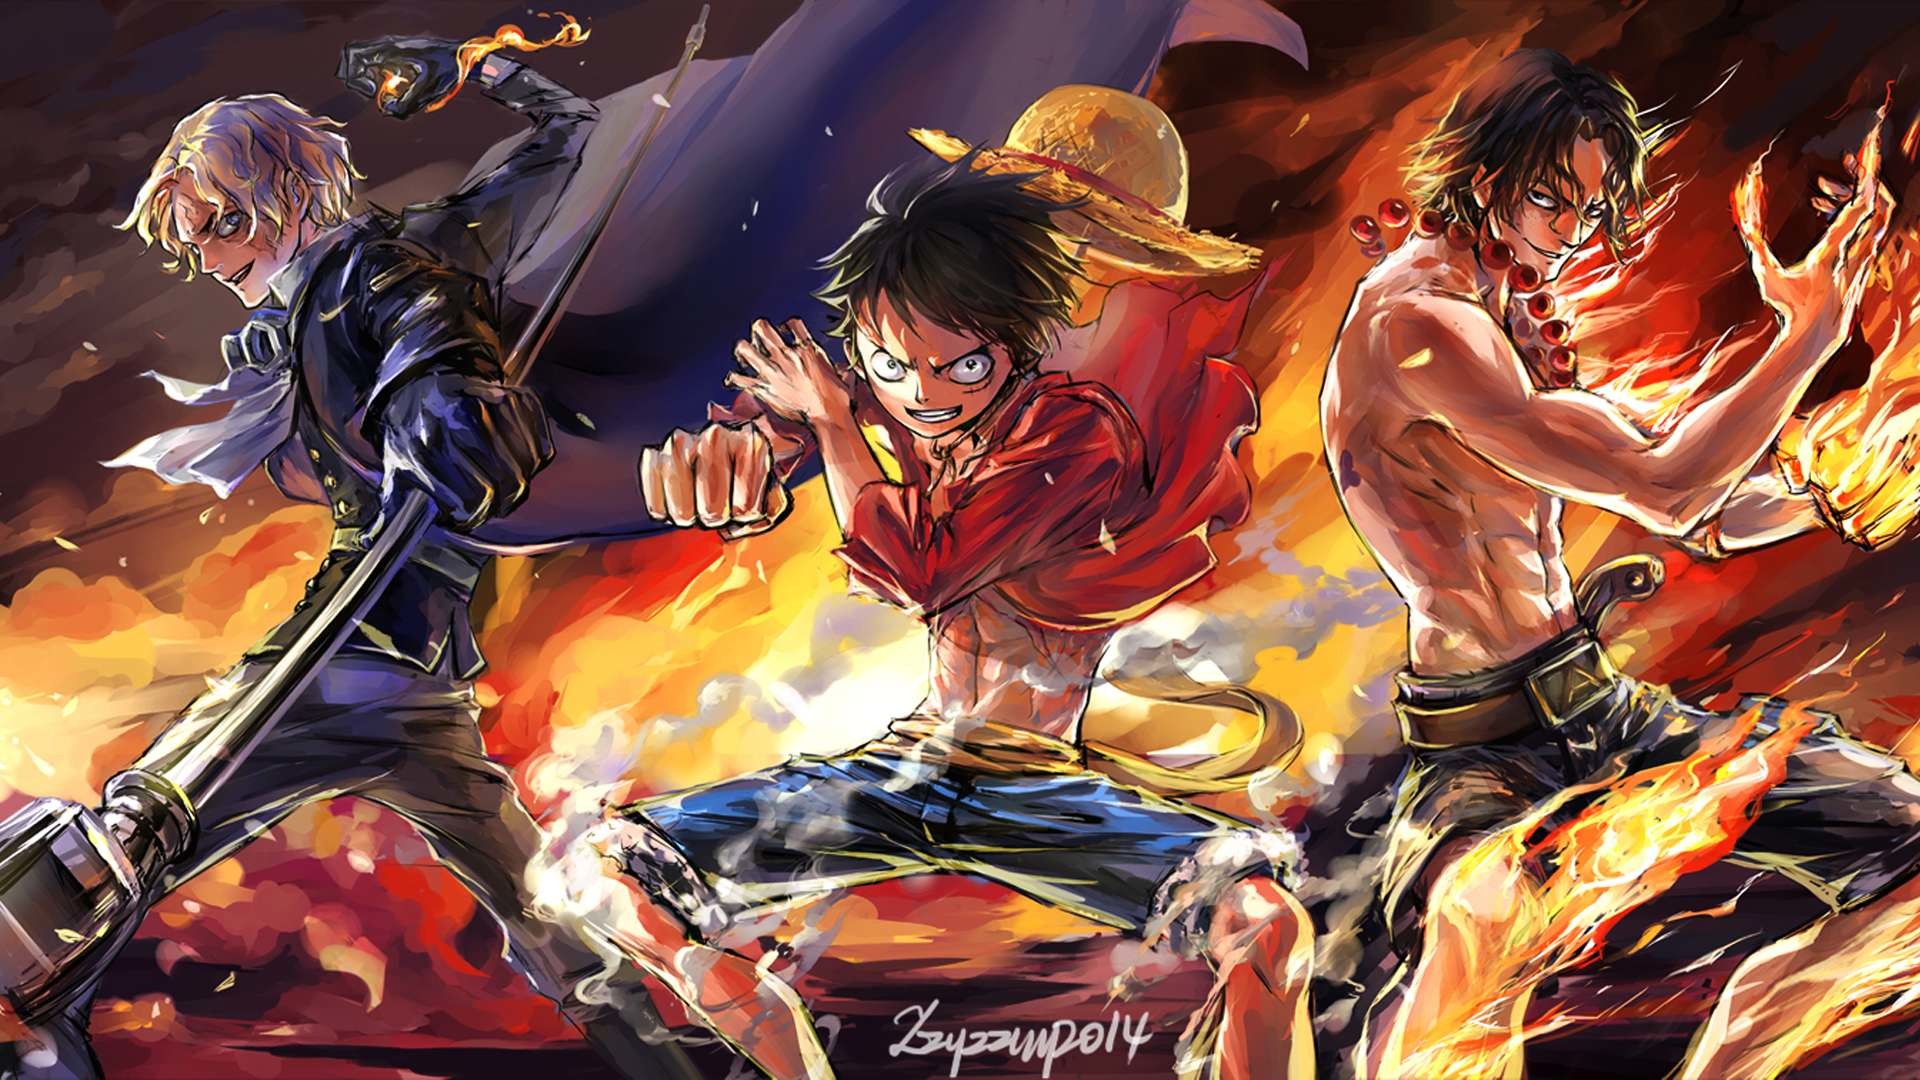 1920x1080 One Piece New World Sabo Wallpapers 10567 - HD Wallpapers Site